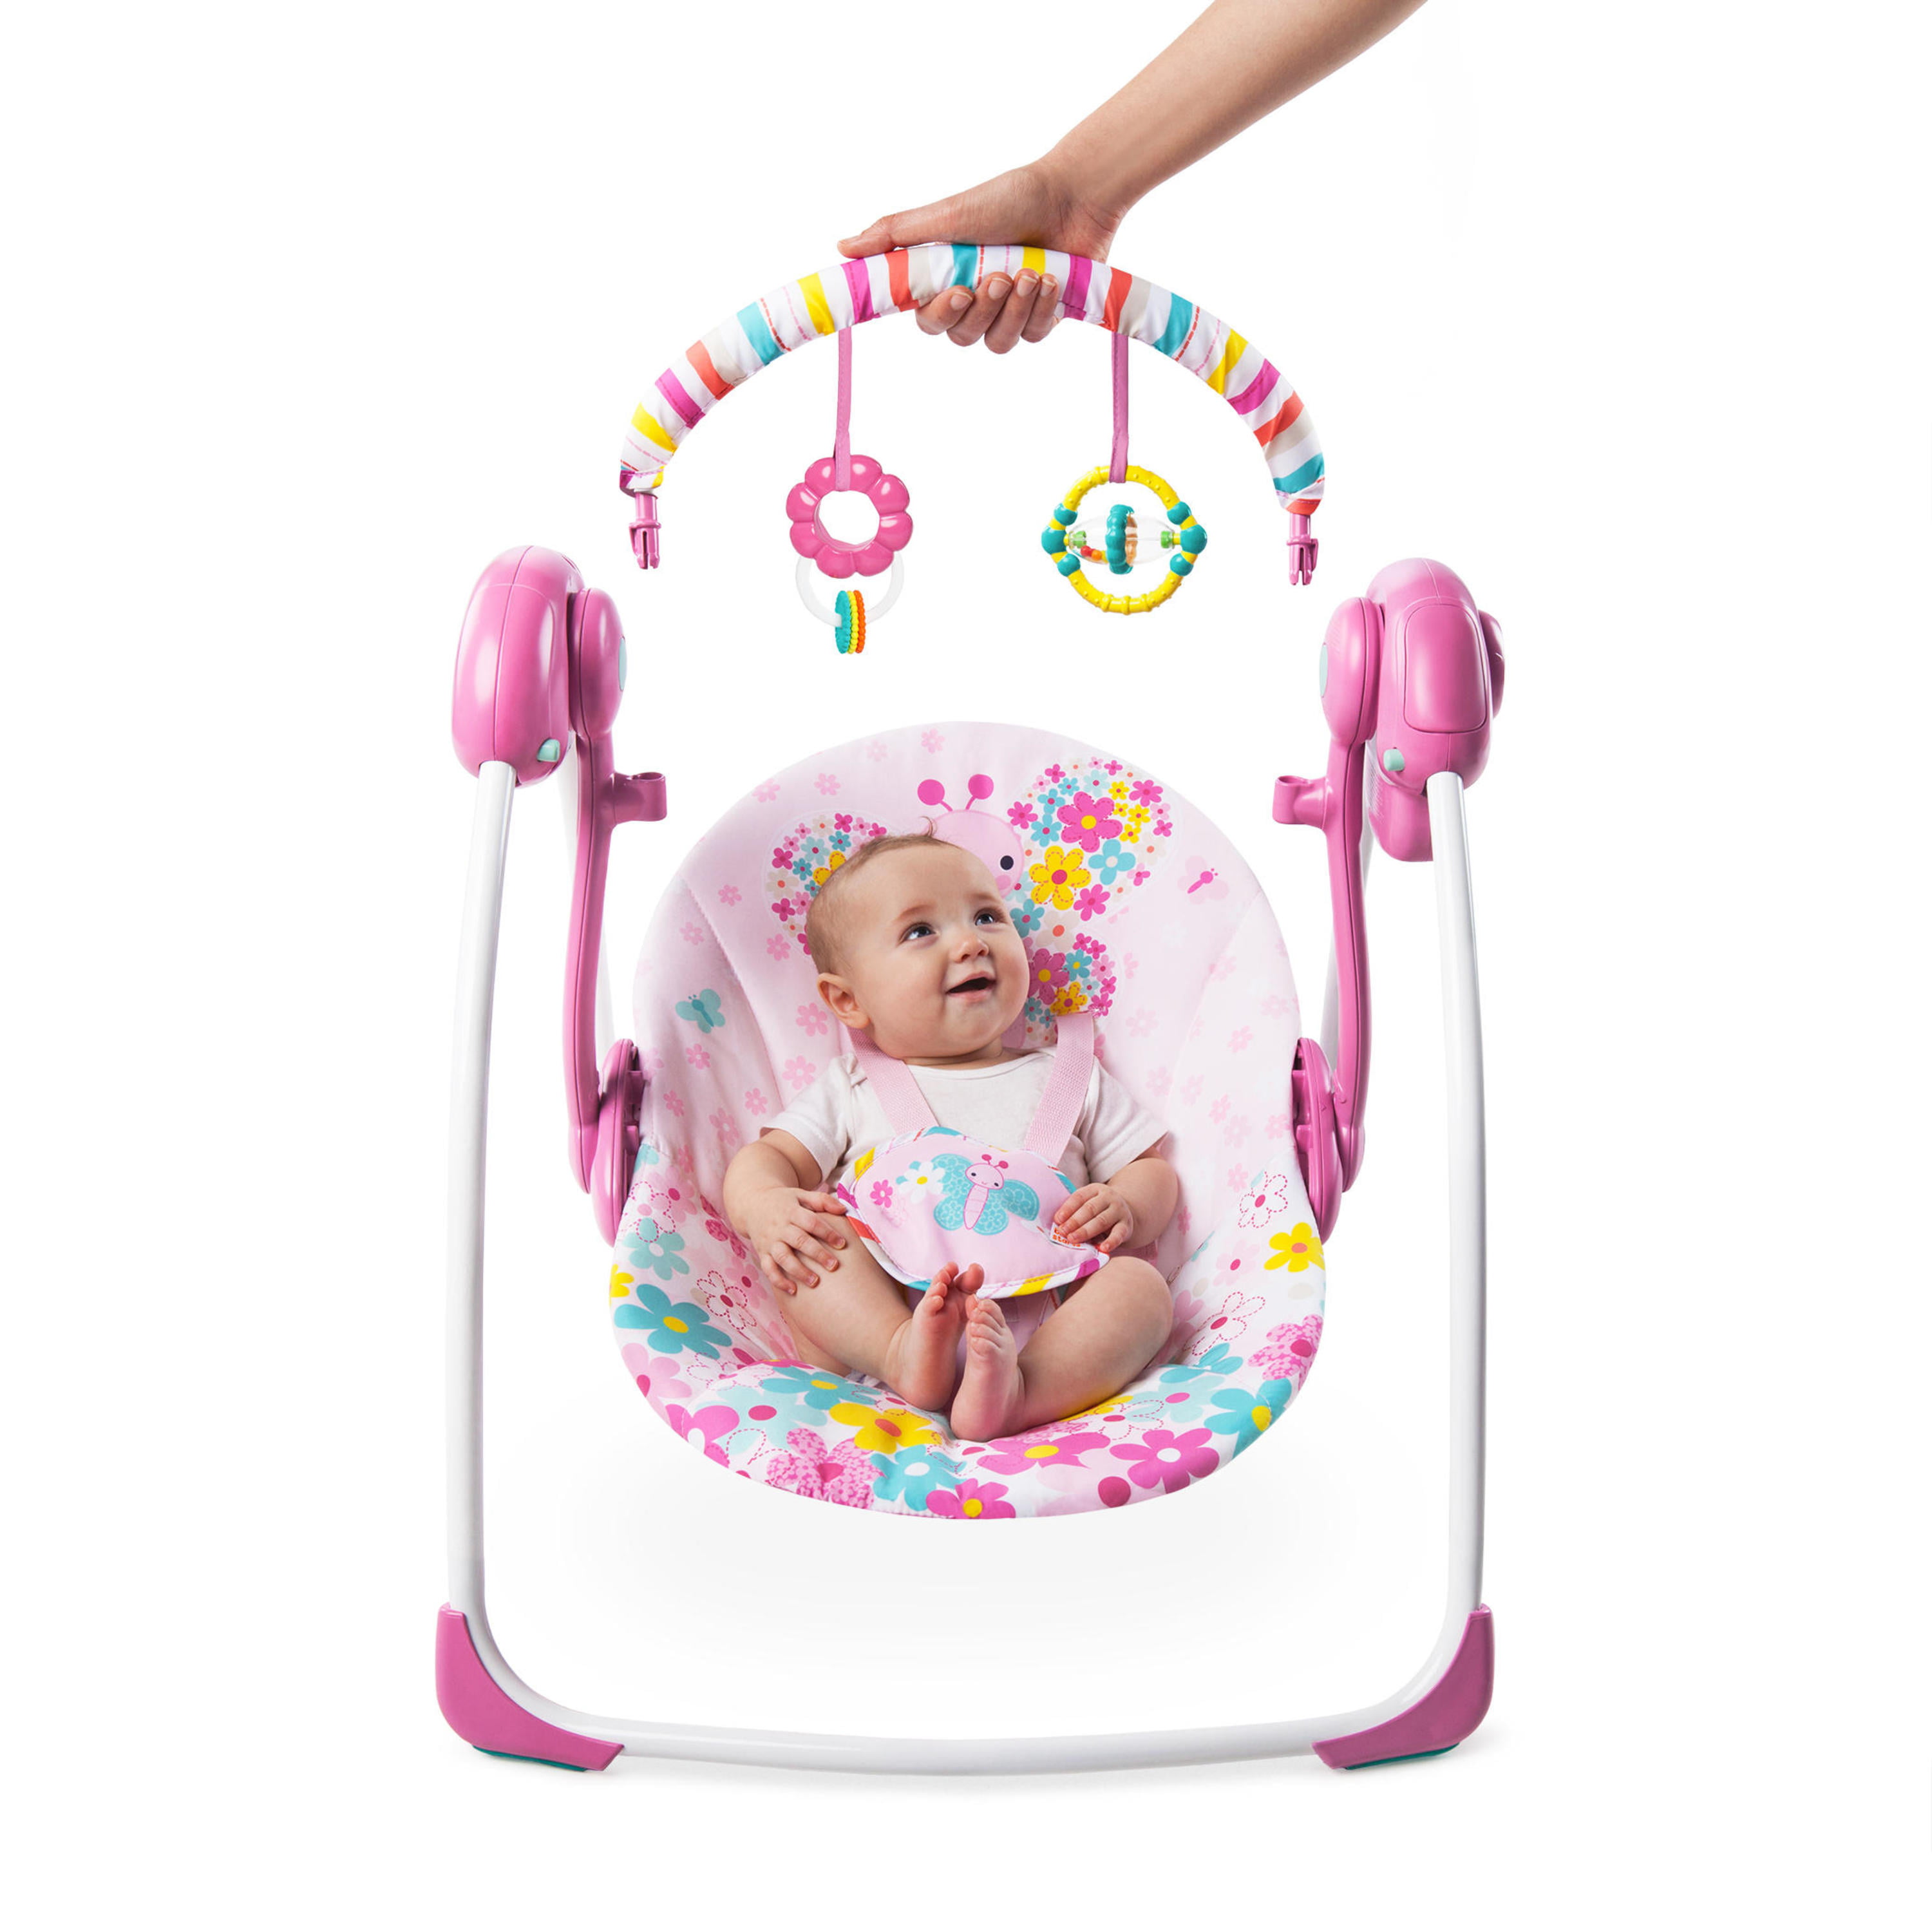 Bright Starts Whimsical Wild Compact Portable Automatic Baby Swing